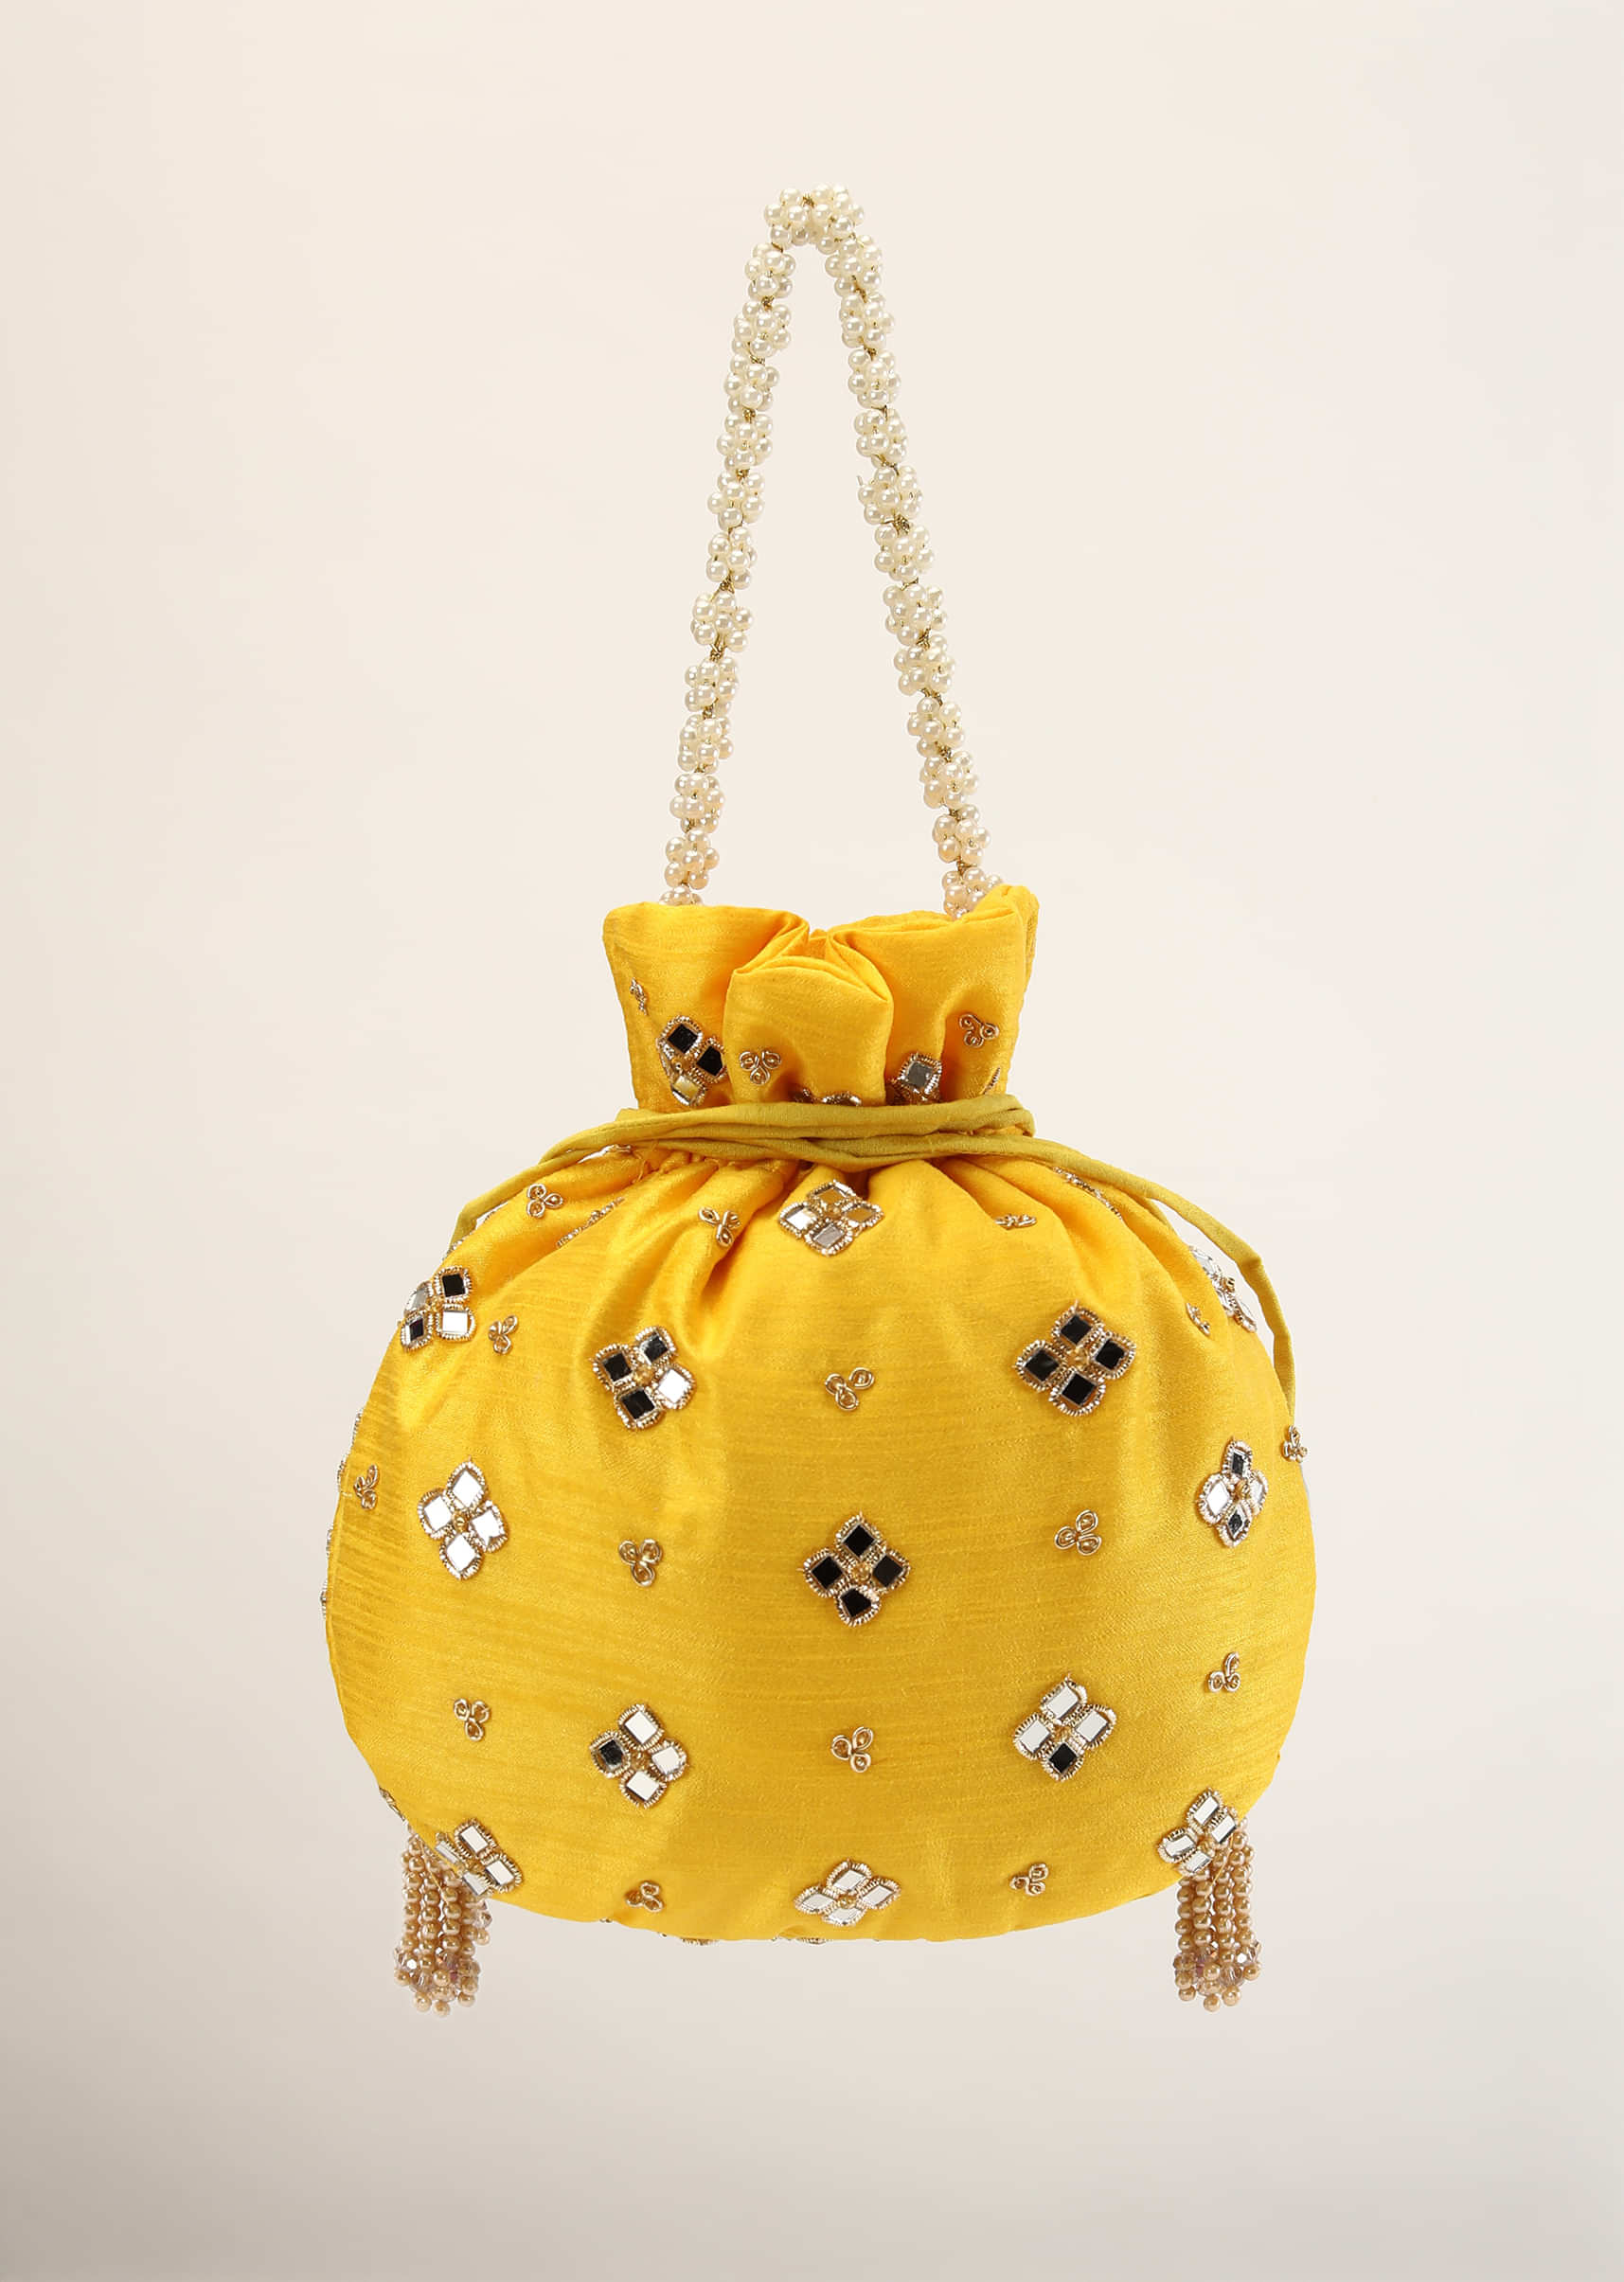 Yellow Potli In Satin With Hand Embroidery Detailing Using Mirror And Zardosi In Geometric Design